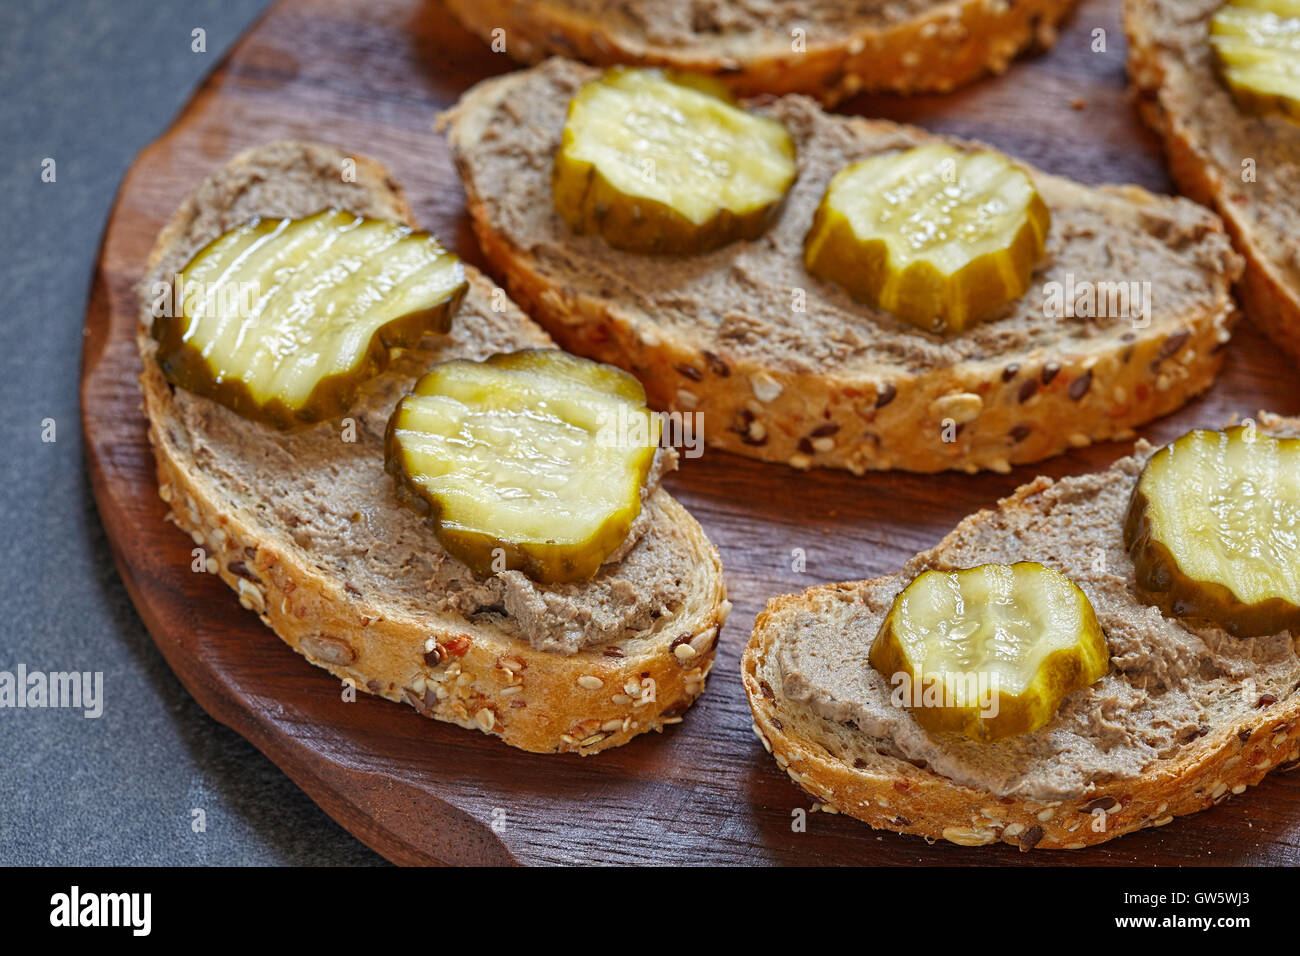 bread with liver pate and pickle cucumber Stock Photo